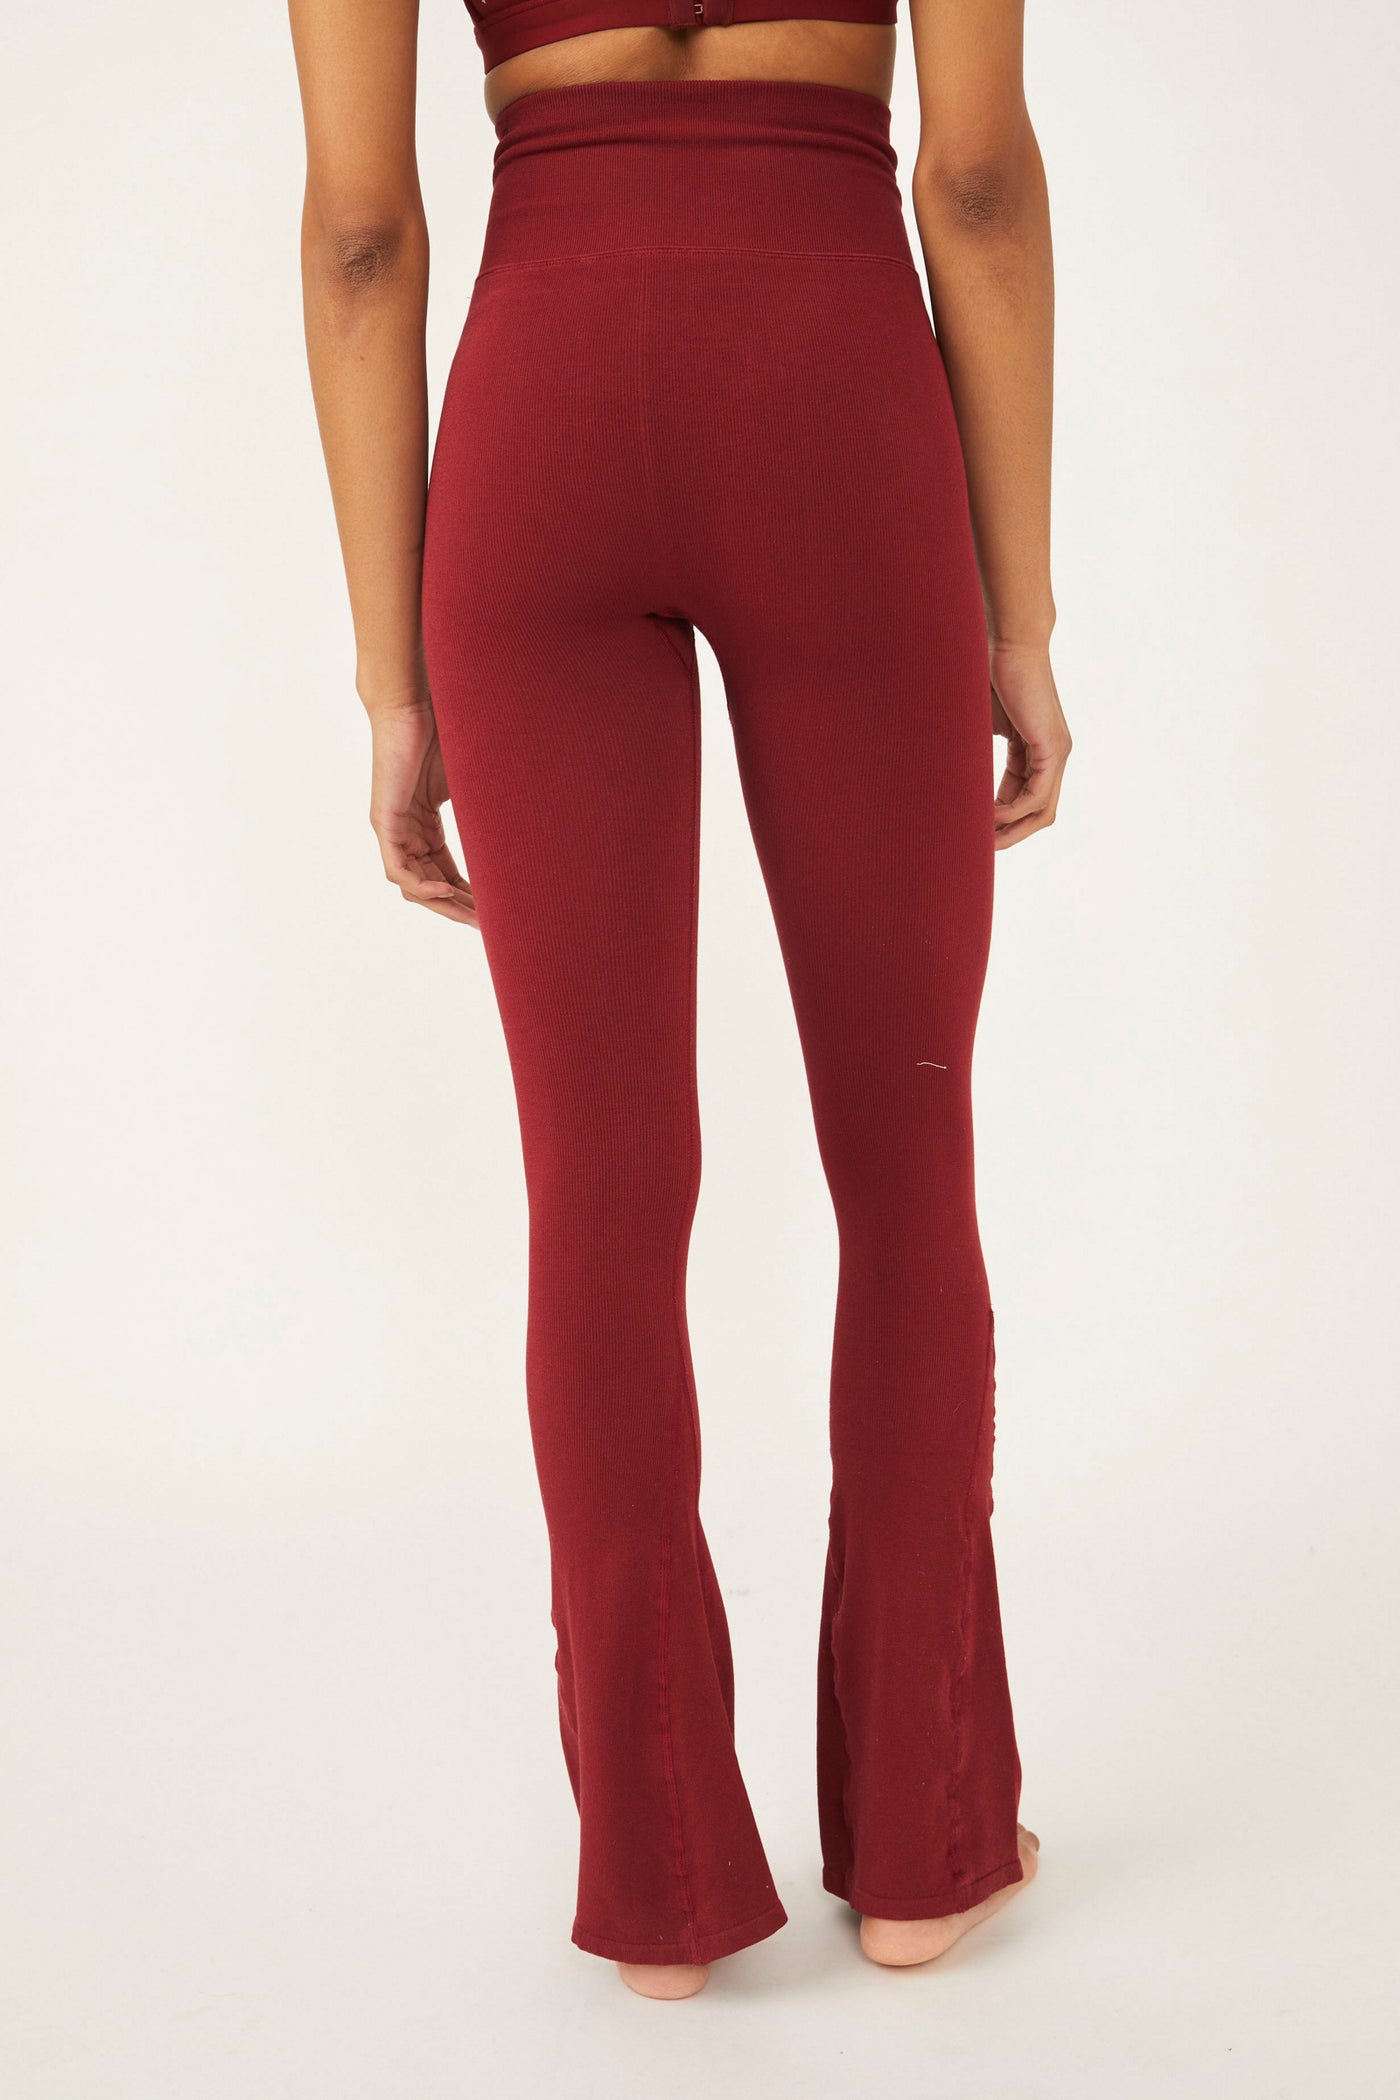 Lordon - Introducing the Rich Soul legging from Free People